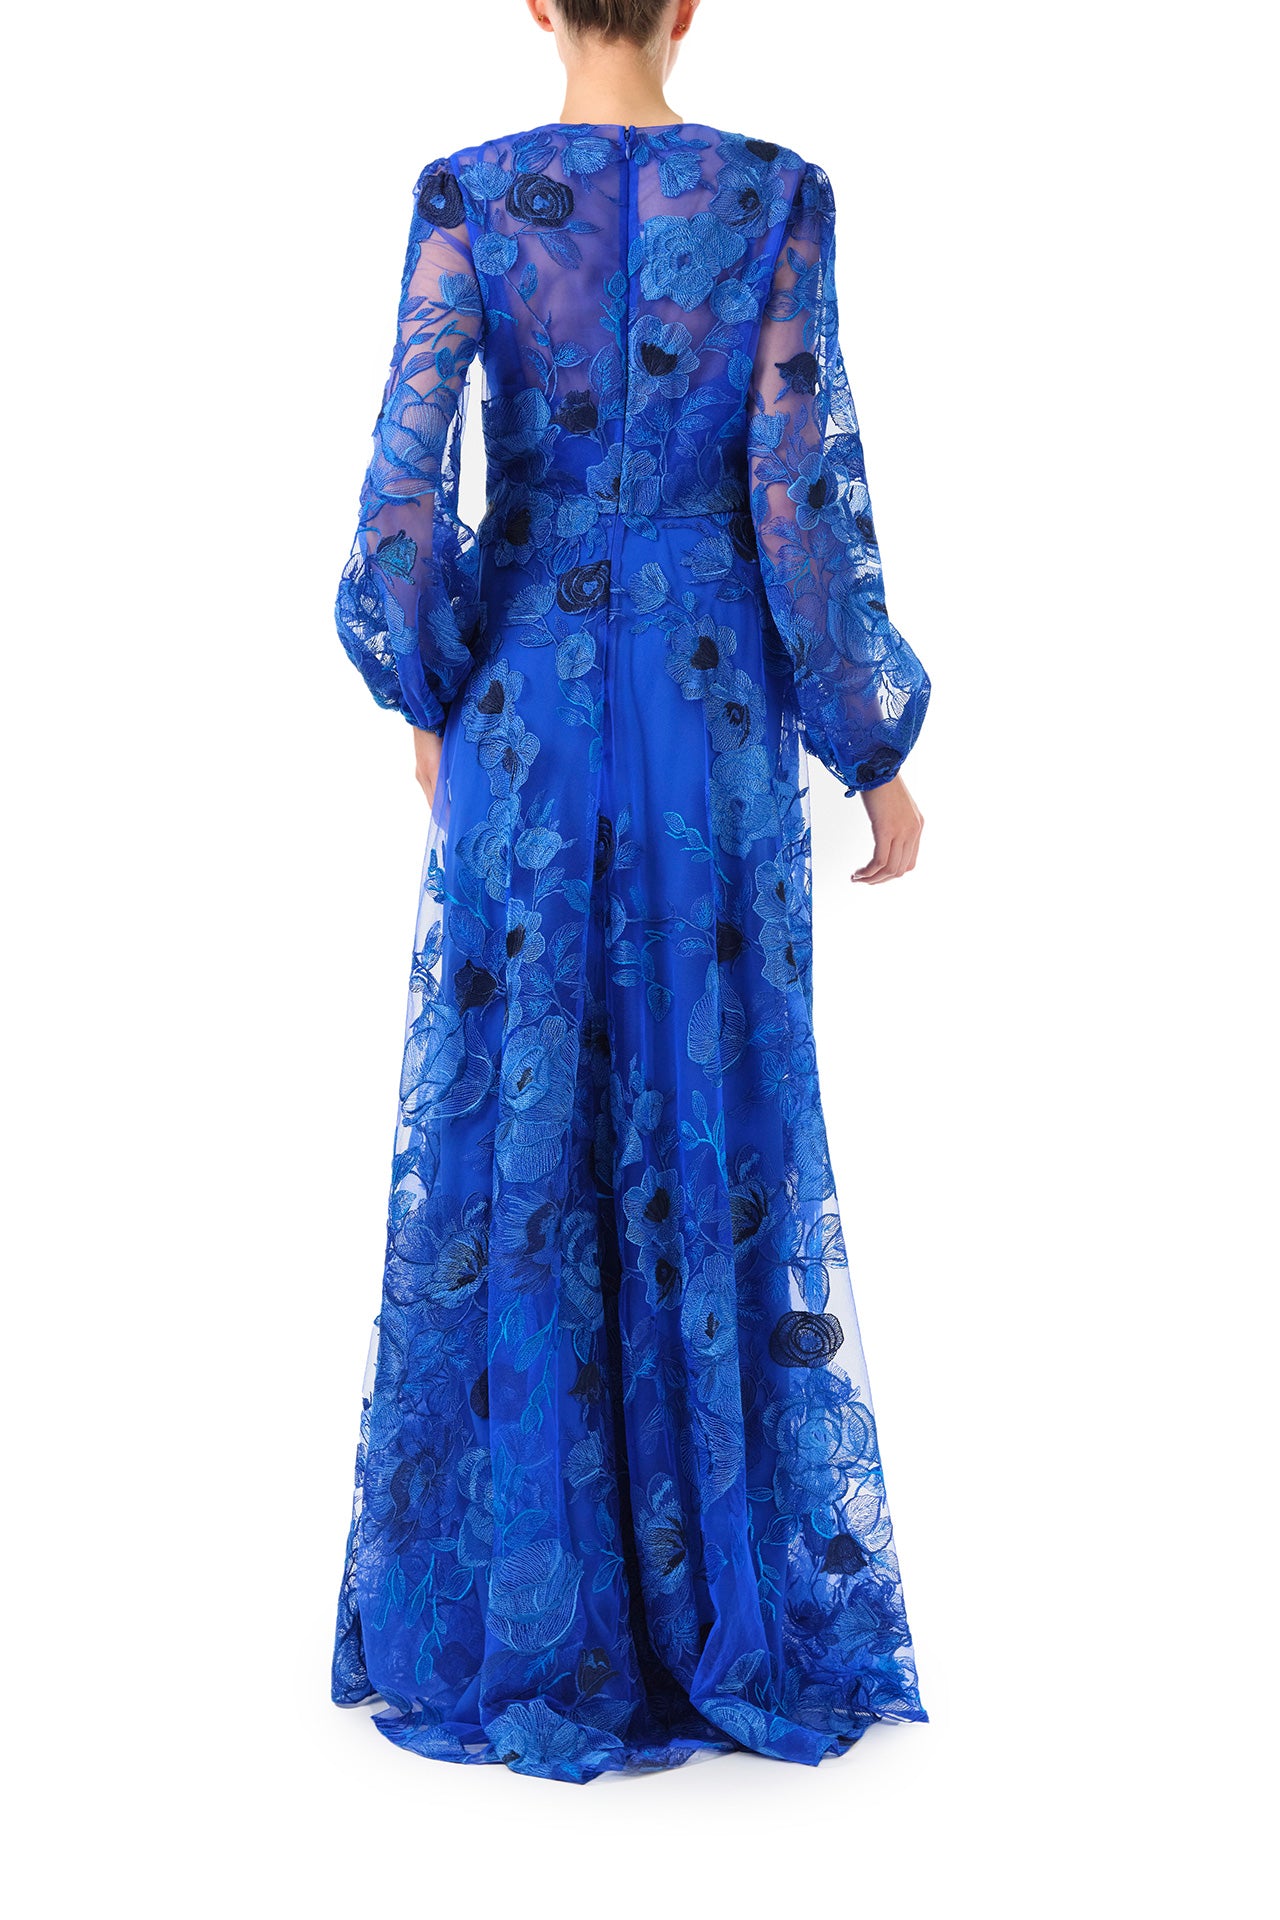 Monique Lhuilier Spring 2024 royal blue embroidered tulle long sleeve column gown with jewel neckline and detached slip lining - back.